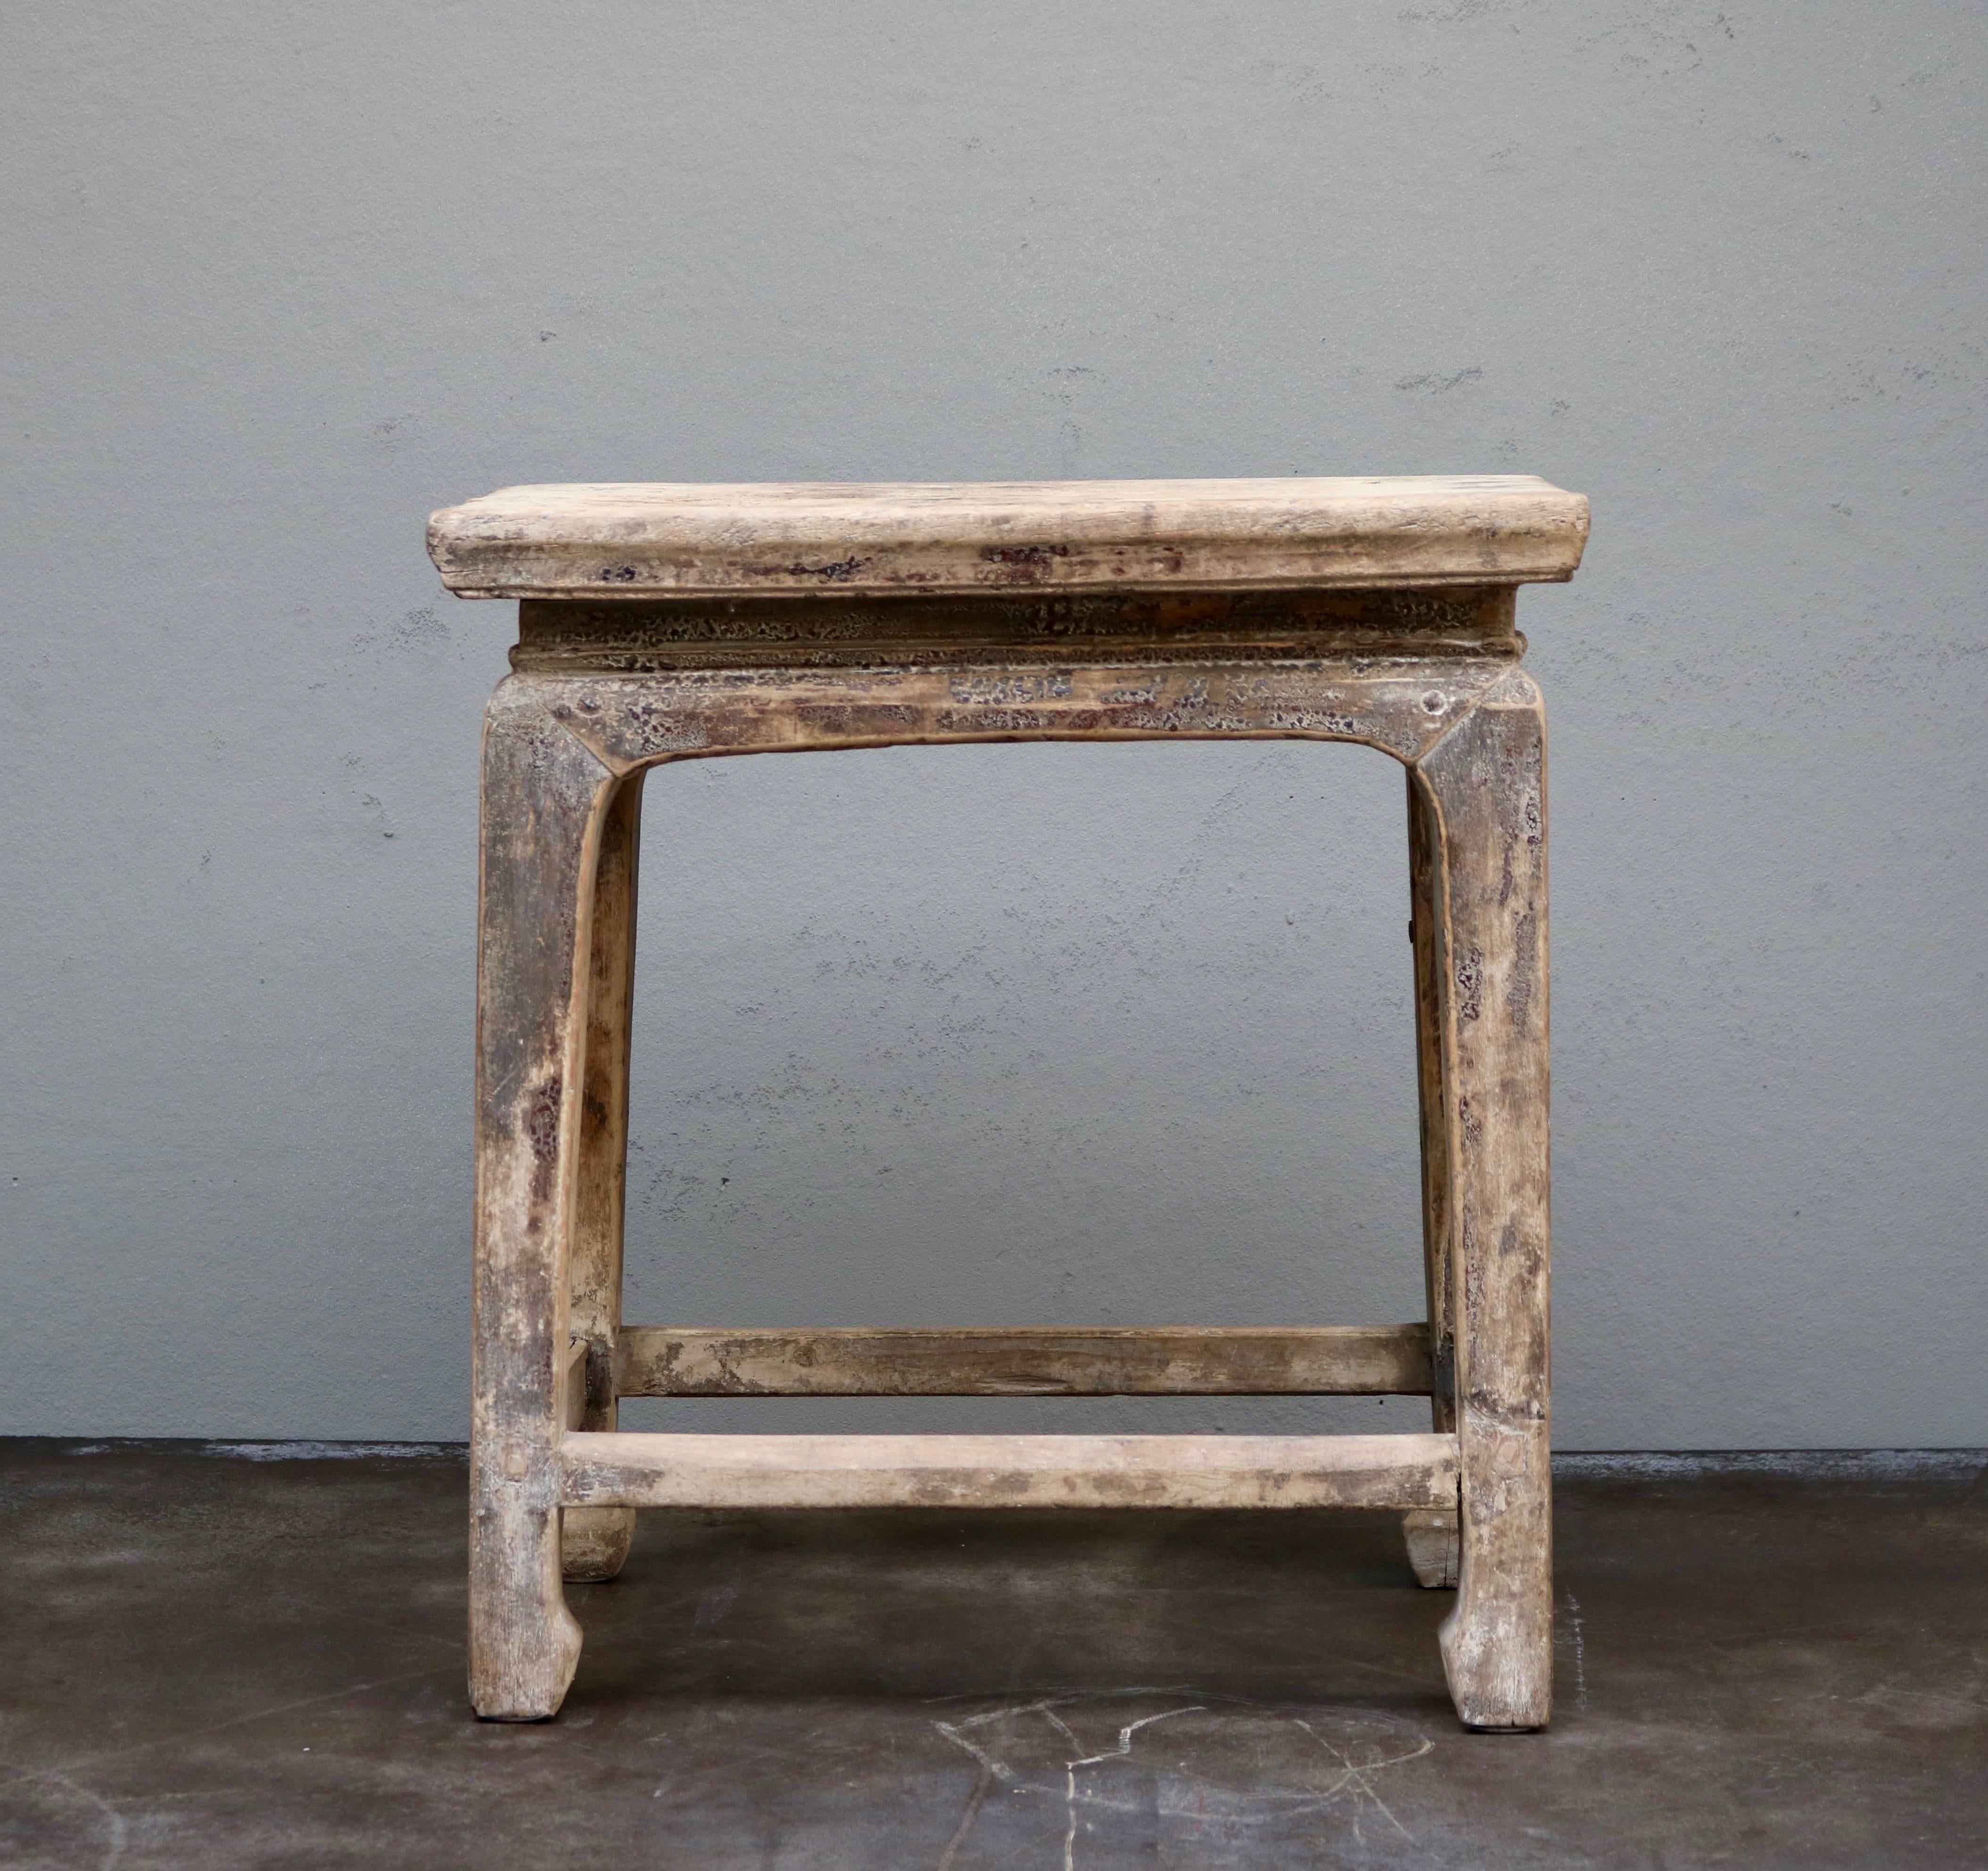 Stool made in ancient Chinese elmwood from the 19th century. Originally from the Shanxi Province in China.